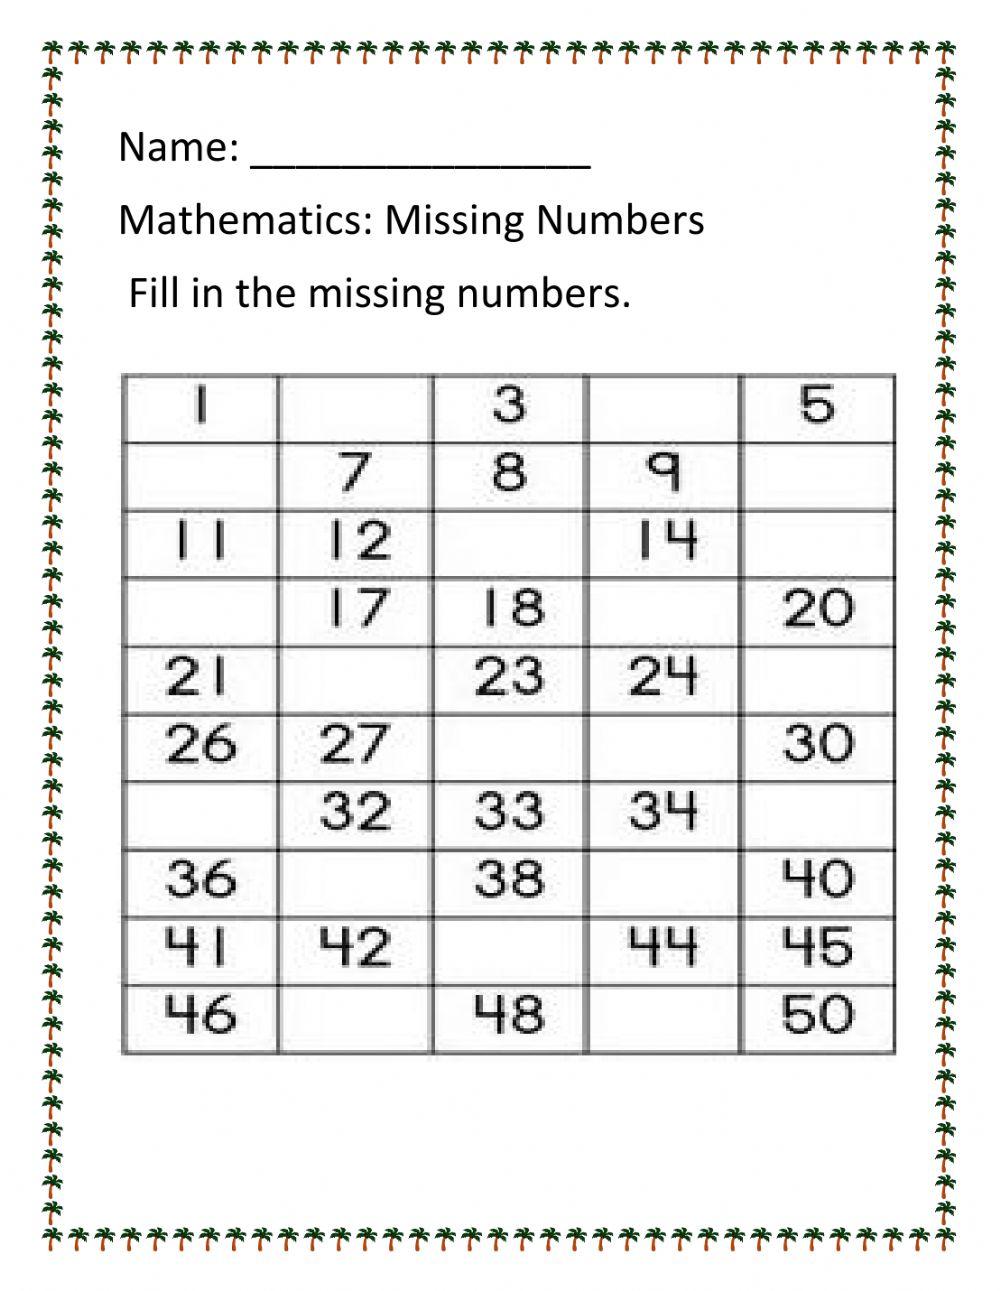 Mising number chart